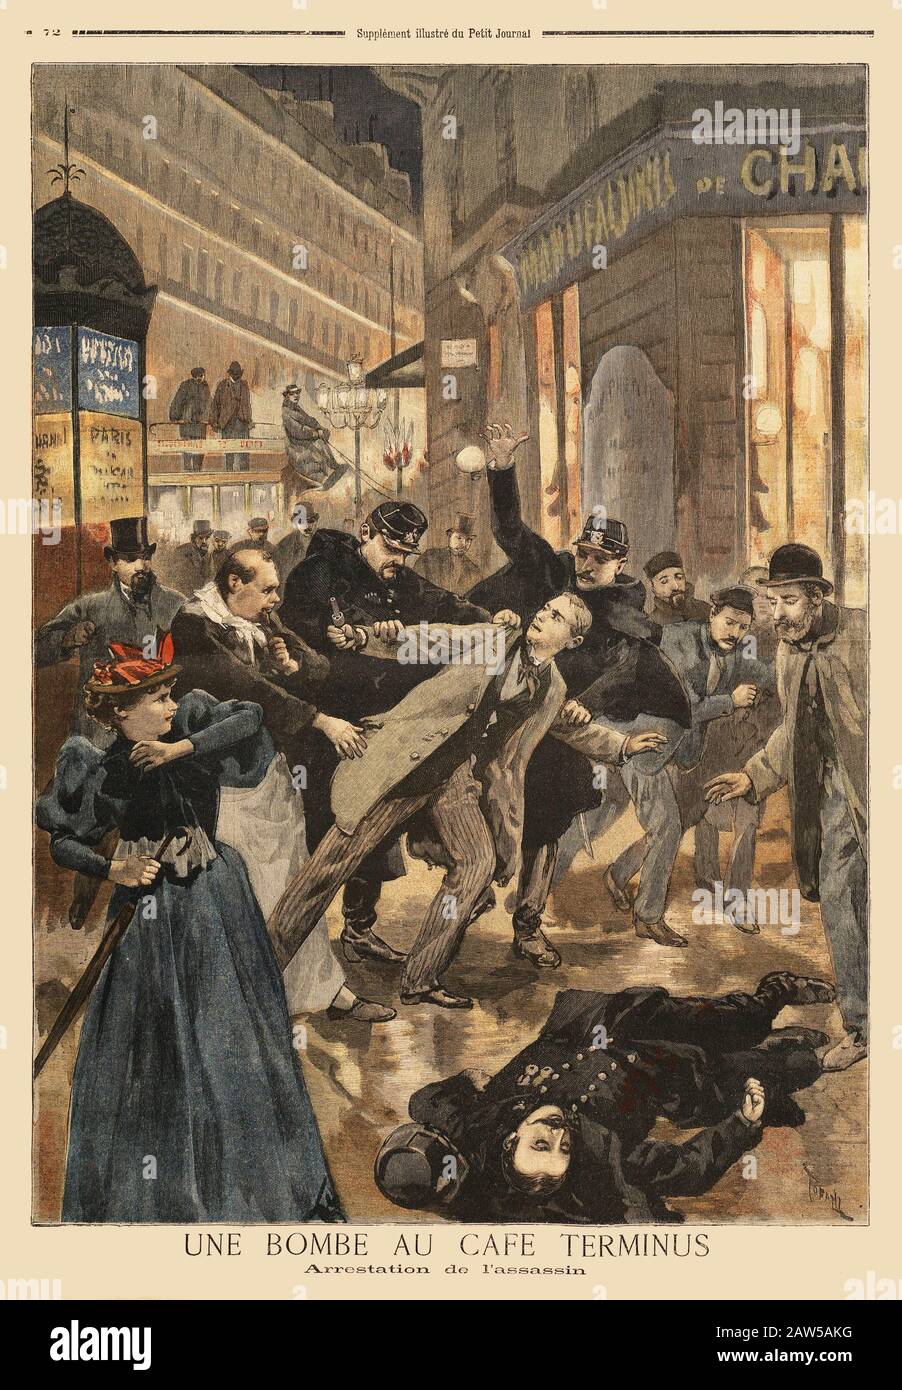 1894 , FRANCE : The french anarchist  Émile HENRY ( 1872 – 1894 ), who on 12 February 1894 detonated a bomb at the Café Terminus in the Parisian Gare Stock Photo